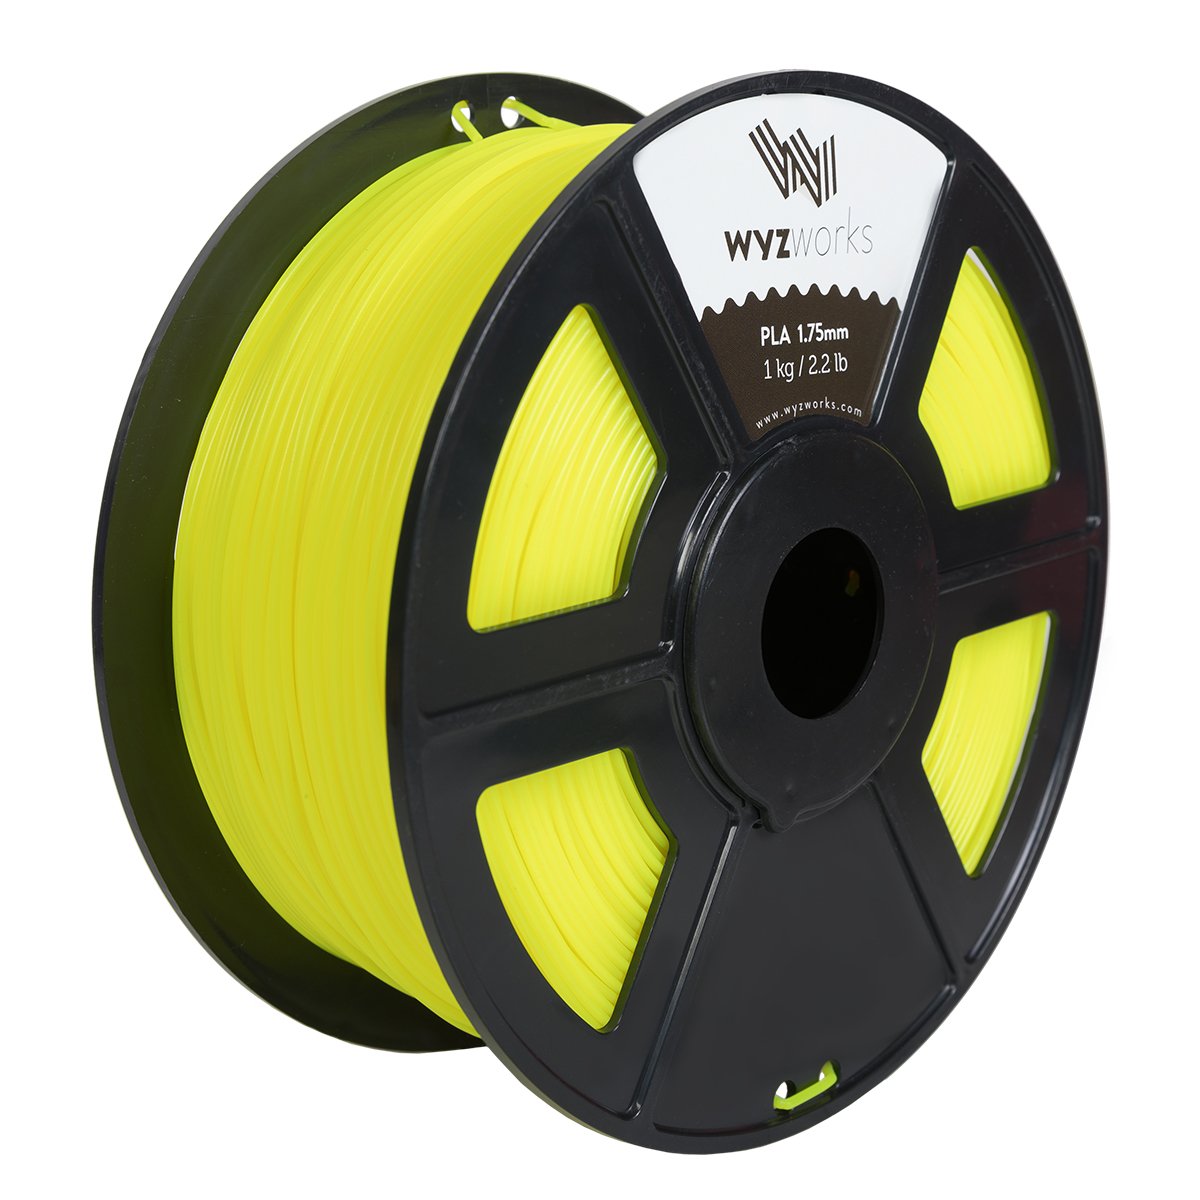 WYZworks PLA 1.75mm [ TRANSLUCENT YELLOW ] Premium Thermoplastic Polylactic Acid 3D Printer Filament - Dimensional Accuracy +/- 0.05mm 1kg / 2.2lb + [ Multiple Color Options Available ]